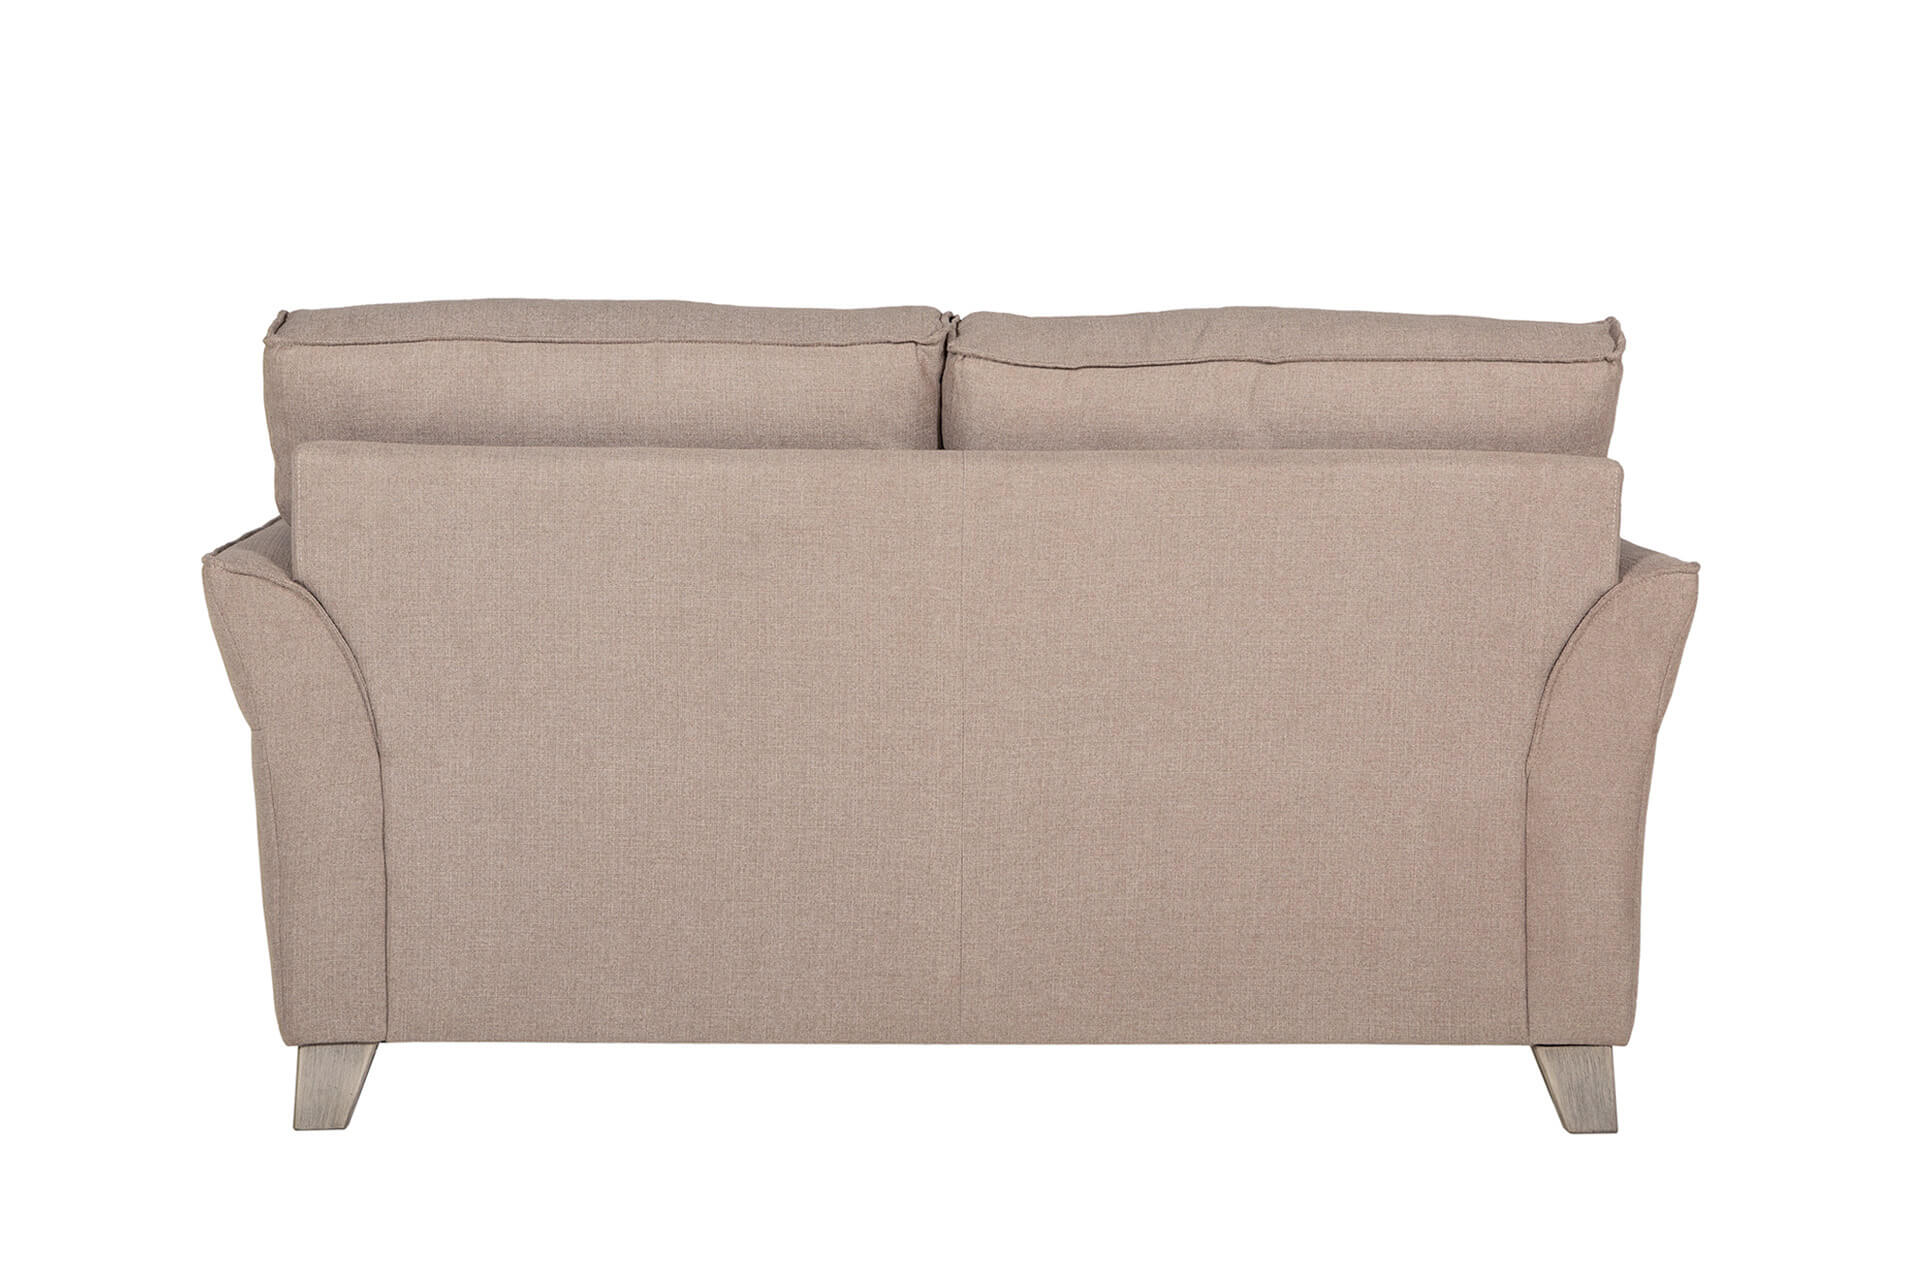 Elias 2 Seater Biscuit Fabric Upholstered Sofa